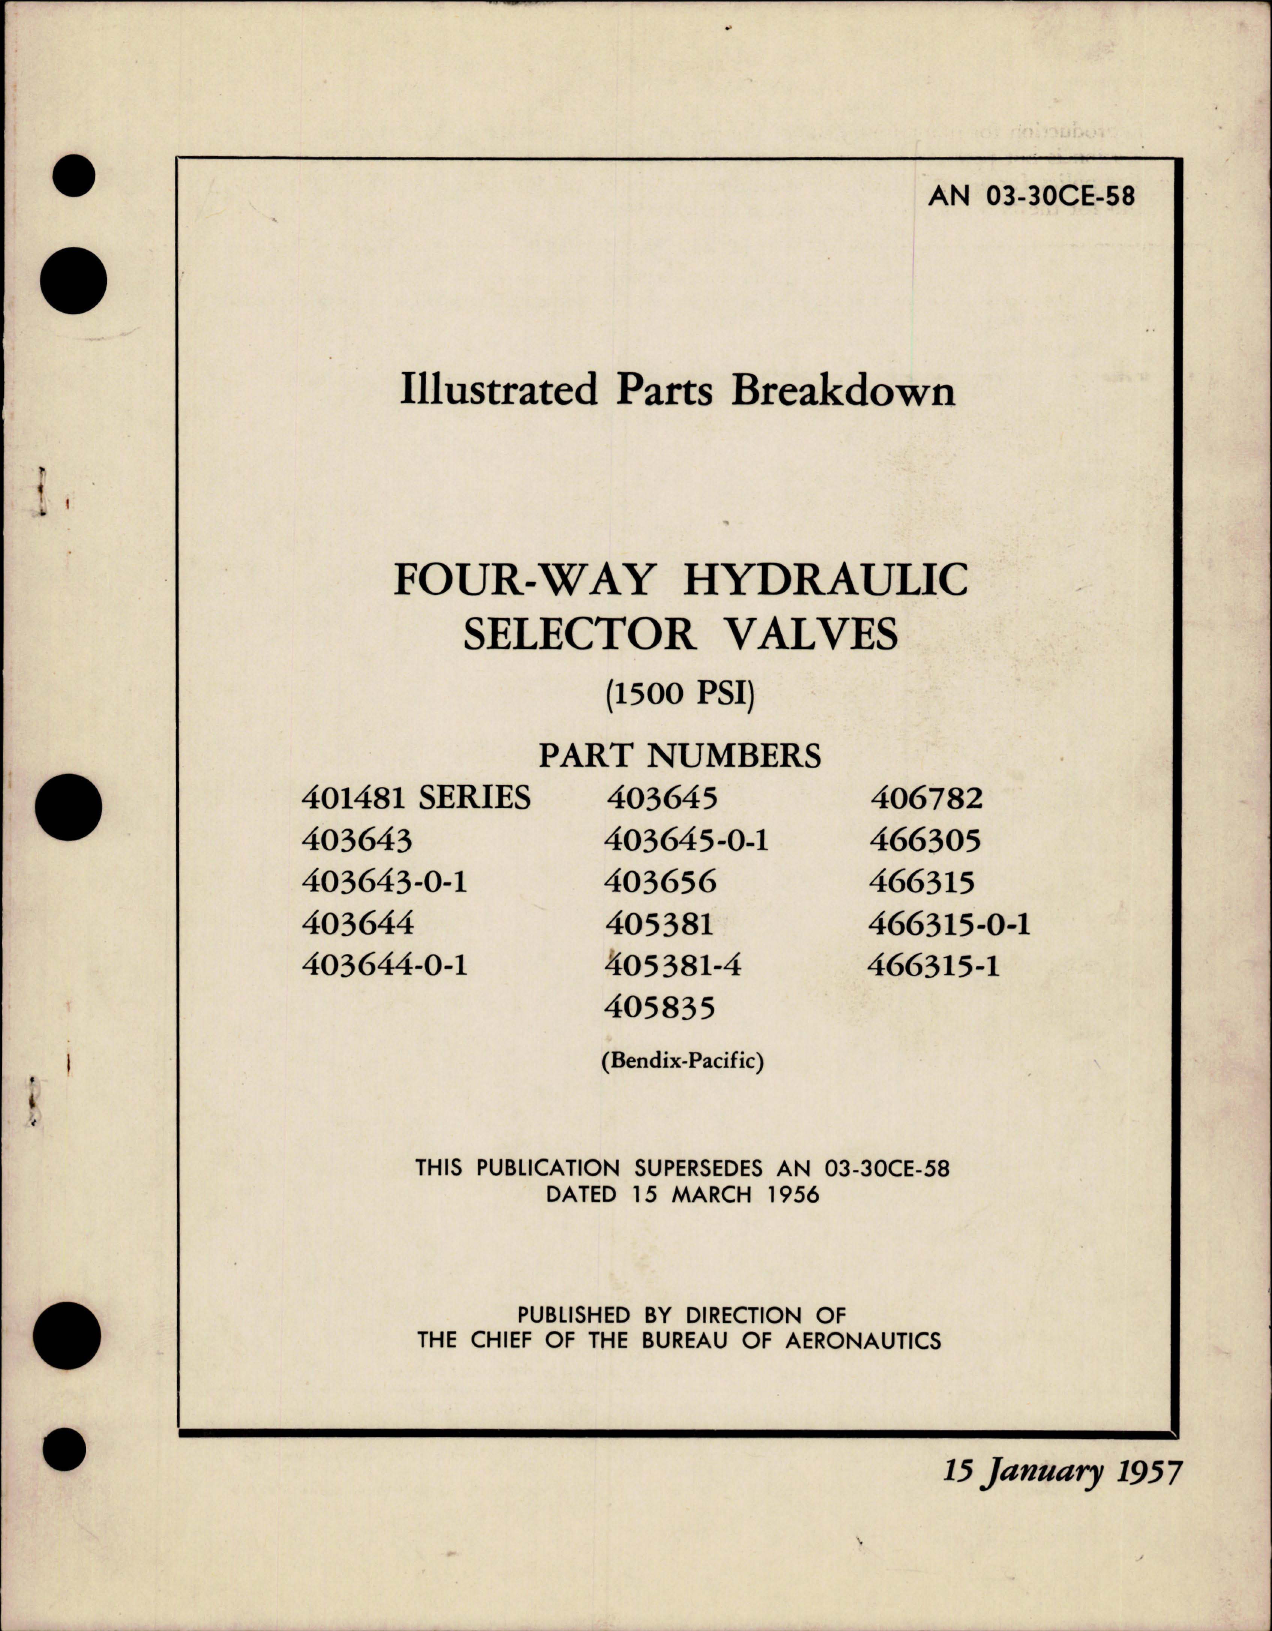 Sample page 1 from AirCorps Library document: Illustrated Parts Breakdown for Four-Way Hydraulic Selector Valves - 1500 psi